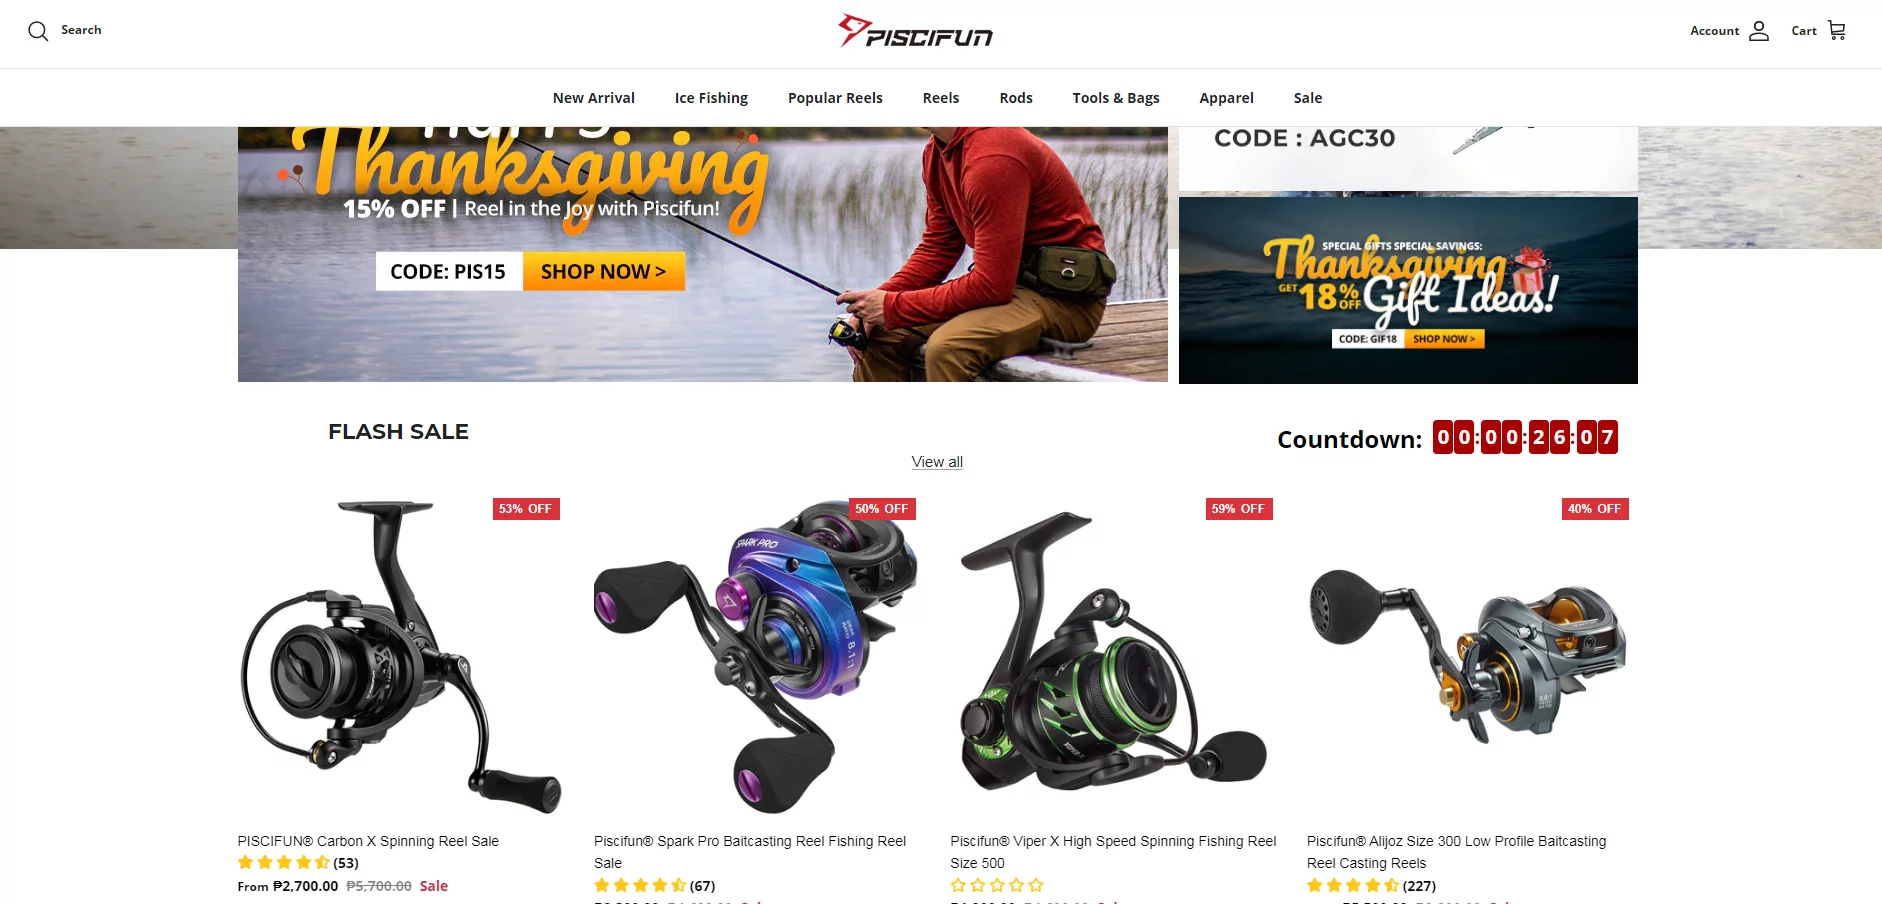 Best Fishing Accessories Dropshipping Suppliers 2: Piscifun